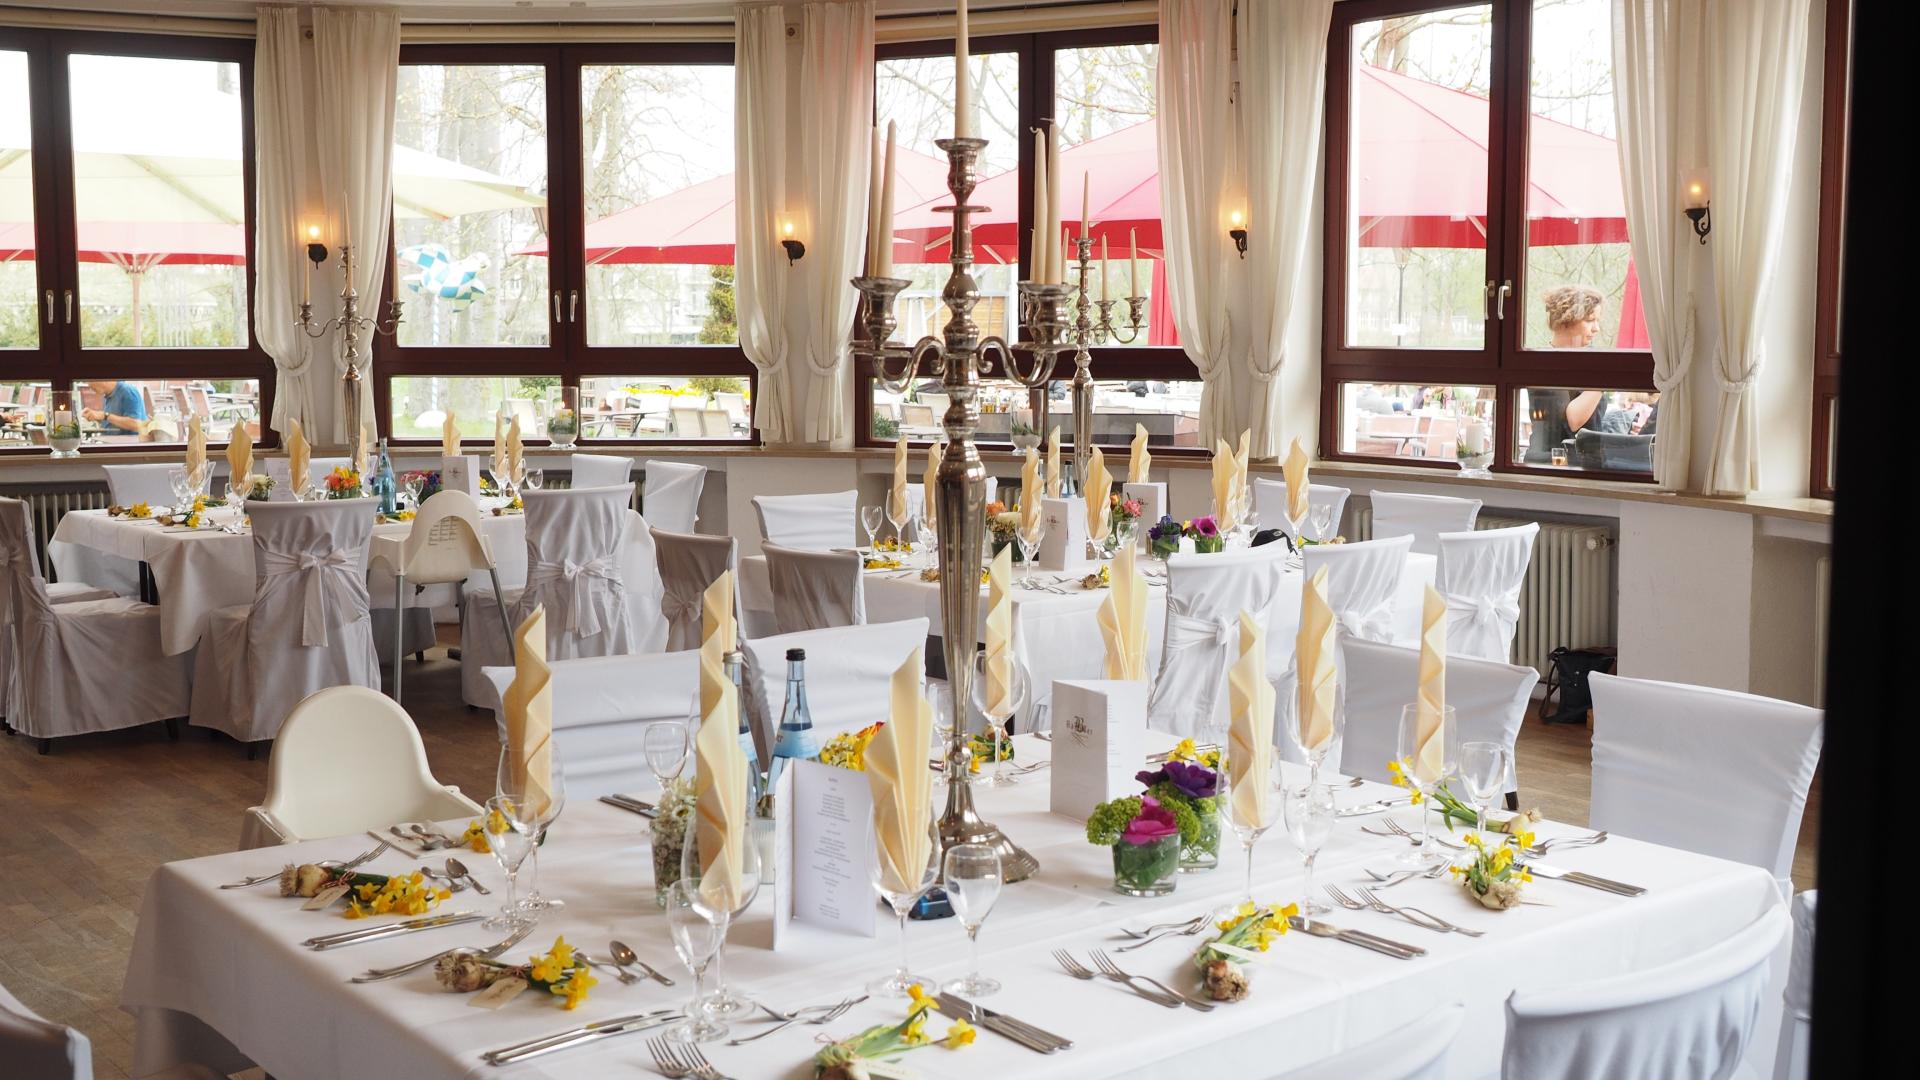 Hotel Wedding Venues for Rent in Chicago, IL